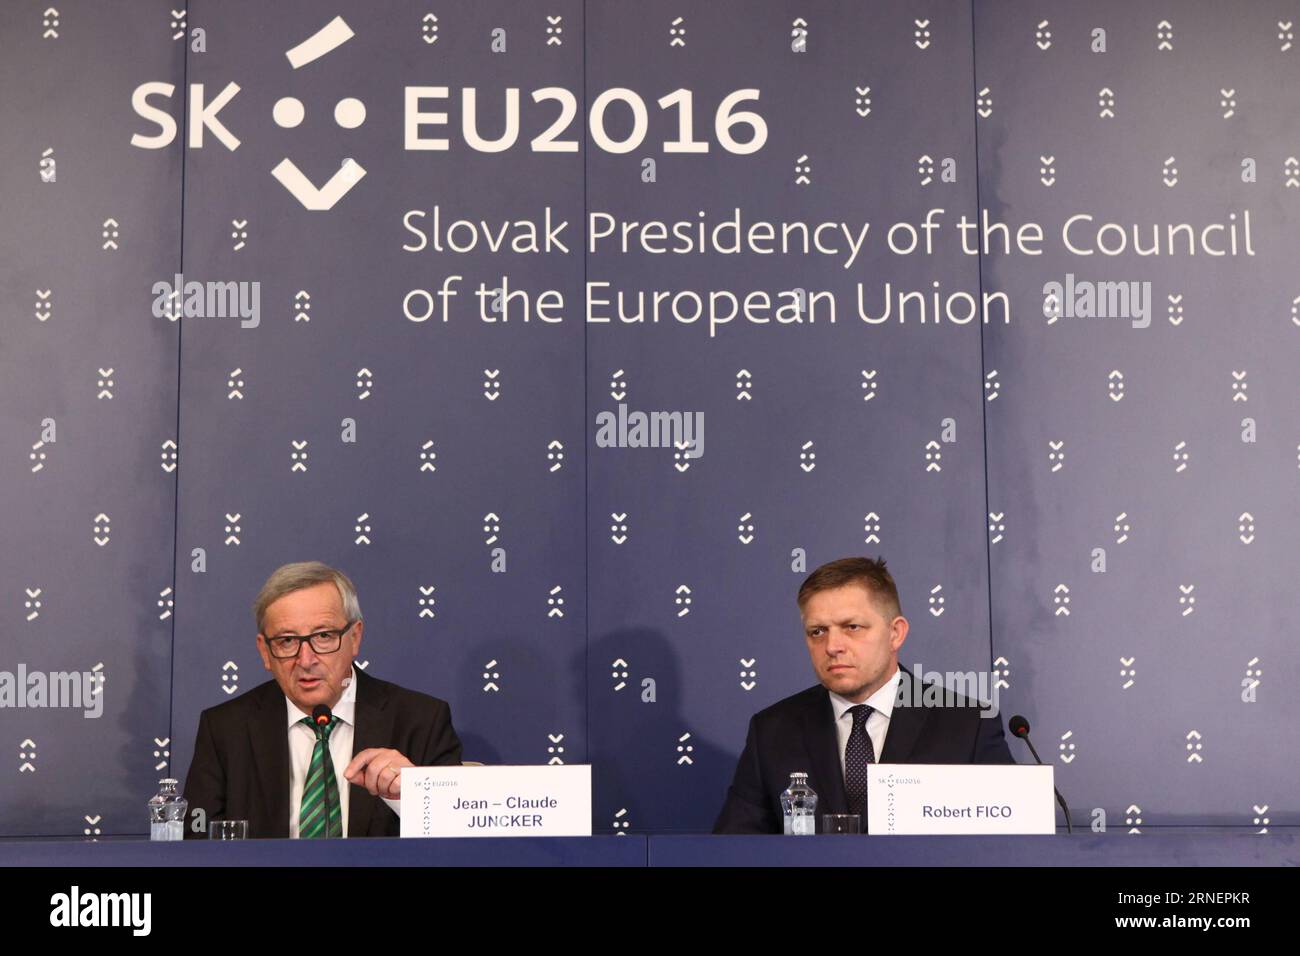 Bilder des Tages (160701) -- BRATISLAVA, July 1, 2016 -- Slovak Prime minister Robert Fico (R) and European Commission President Jean-Claude Juncker attend the press conference after bilateral meeting in Bratislava, capital of Slovakia, on July 1, 2016. Slovakia officially took over a six-month rotating Presidency of the Council of the European Union (EU) from the Netherlands on Friday. ) SLOVAKIA-BRATISLAVA-PRESIDENCY OF EU COUNCIL AndrejxKlizan PUBLICATIONxNOTxINxCHN   Images the Day 160701 Bratislava July 1 2016 Slovak Prime Ministers Robert Fico r and European Commission President Jean Cla Stock Photo